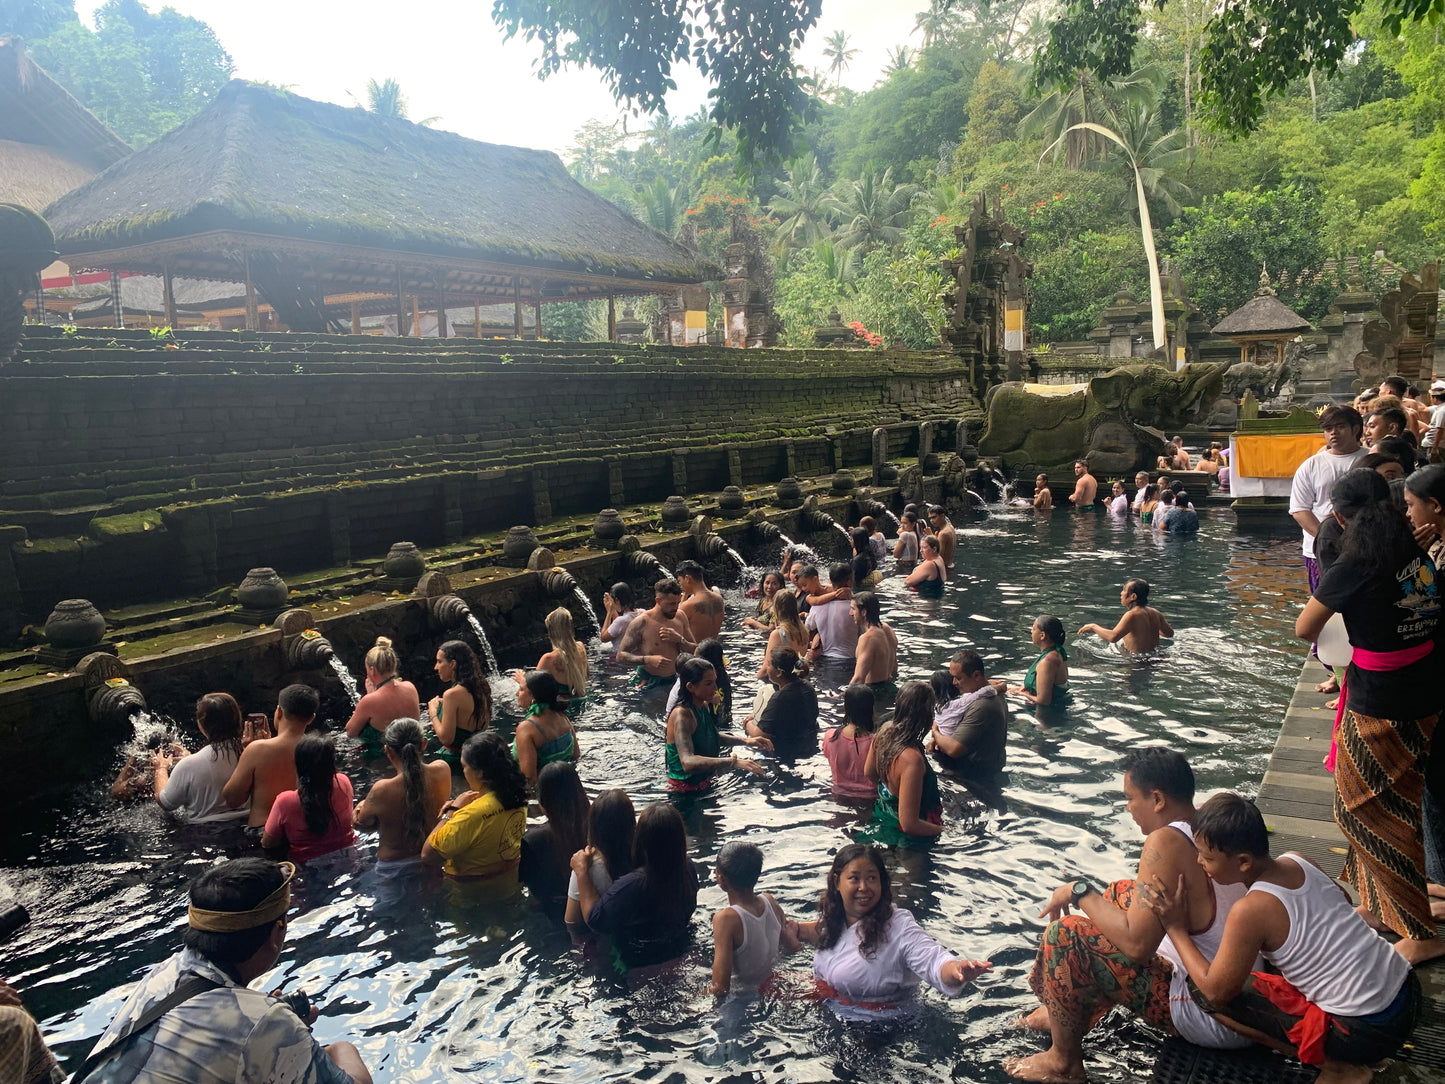 A8C: (3 DAYS) Bali Adventure! Nature's Wonders Call With Majestic Volcanic Peaks, Beach Treasures And Sacred Water Temple